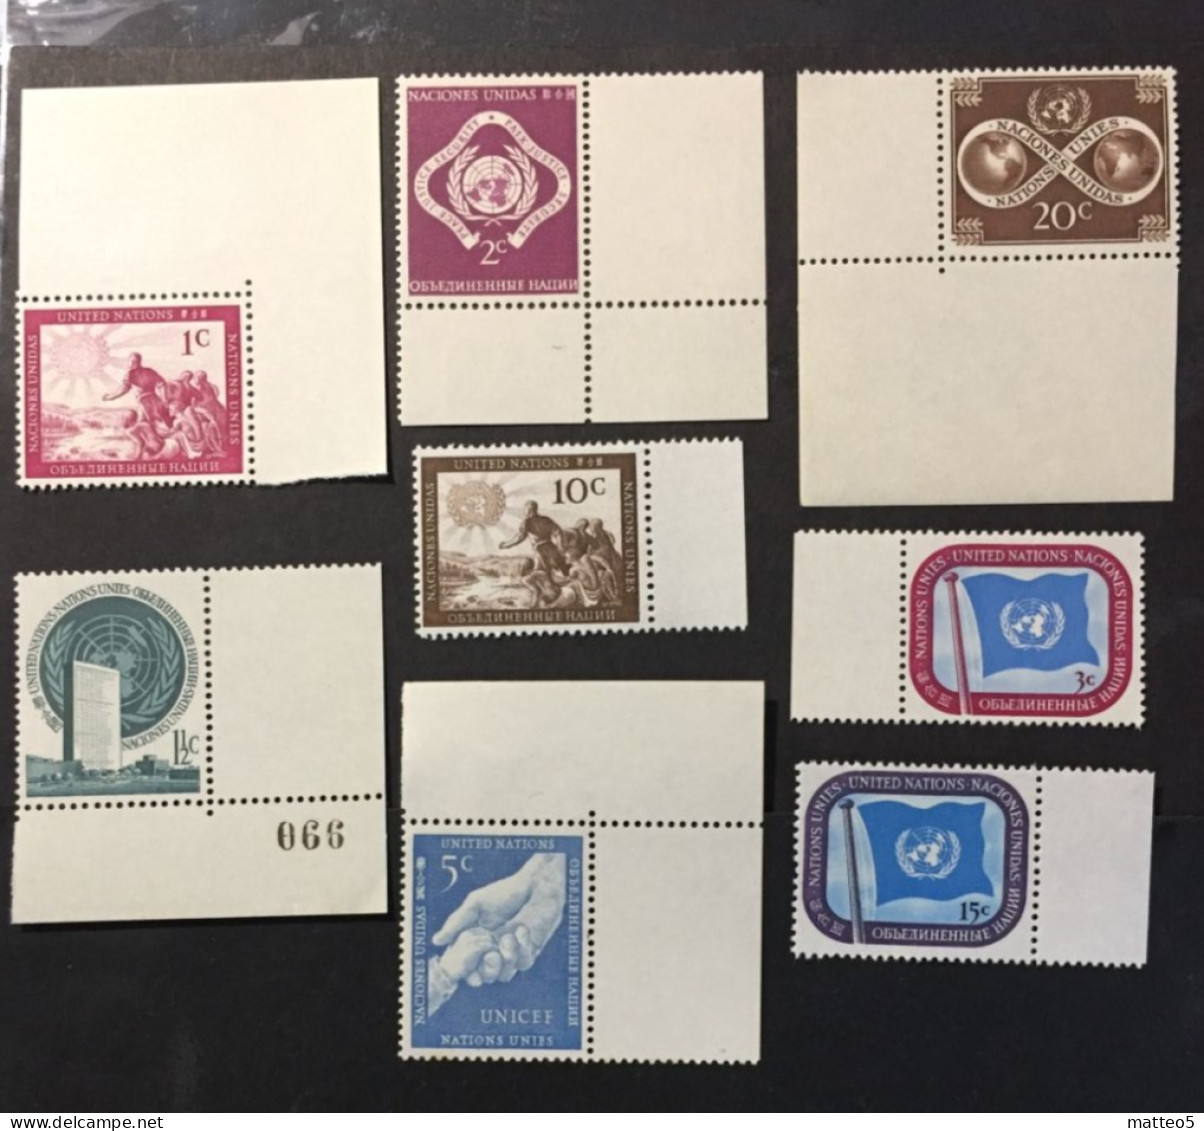 1951 - United Nations UNO UN ONU - 8 Stamps Of The Year 1951 -  Unused - Unused Stamps